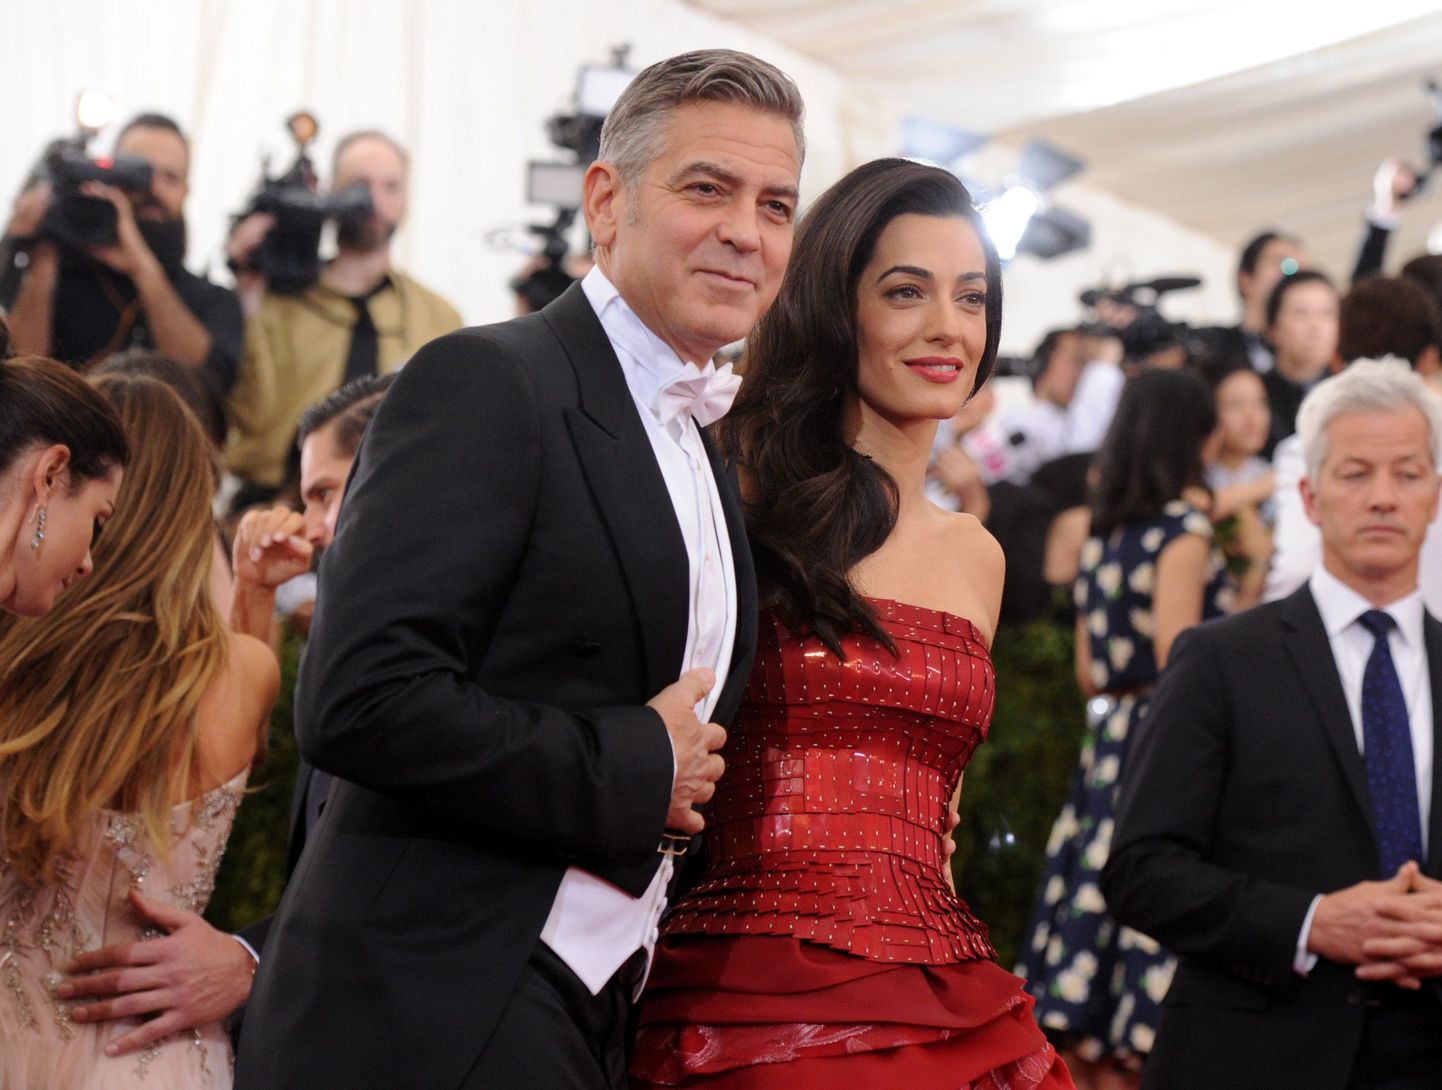 George Clooney and Amal Clooney arrive at The Metropolitan Museum of Art's Costume Institute benefit gala celebrating "China: Through the Looking Glass" on Monday, May 4, 2015, in New York. (Photo by Evan Agostini/Invision/AP)